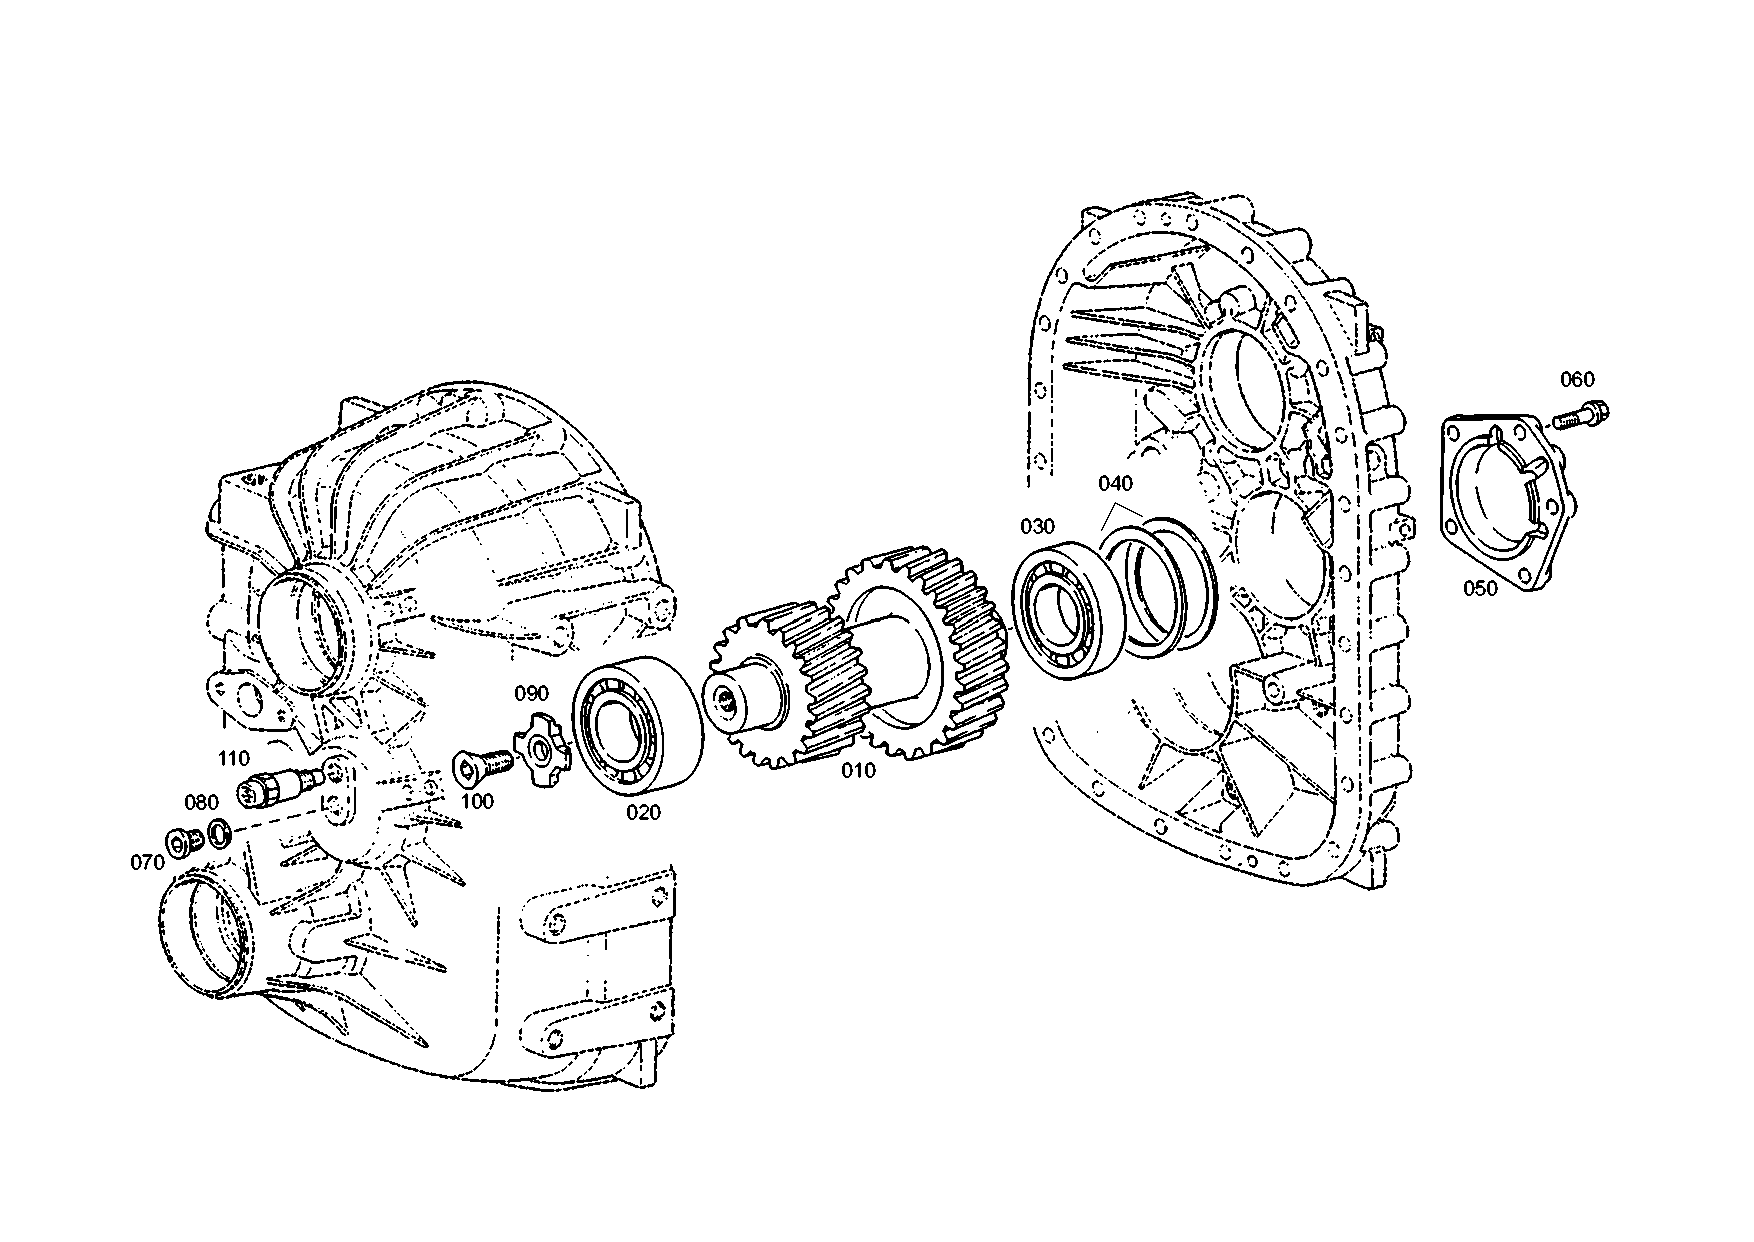 drawing for MARMON Herring MVG751061 - DOUBLE GEAR